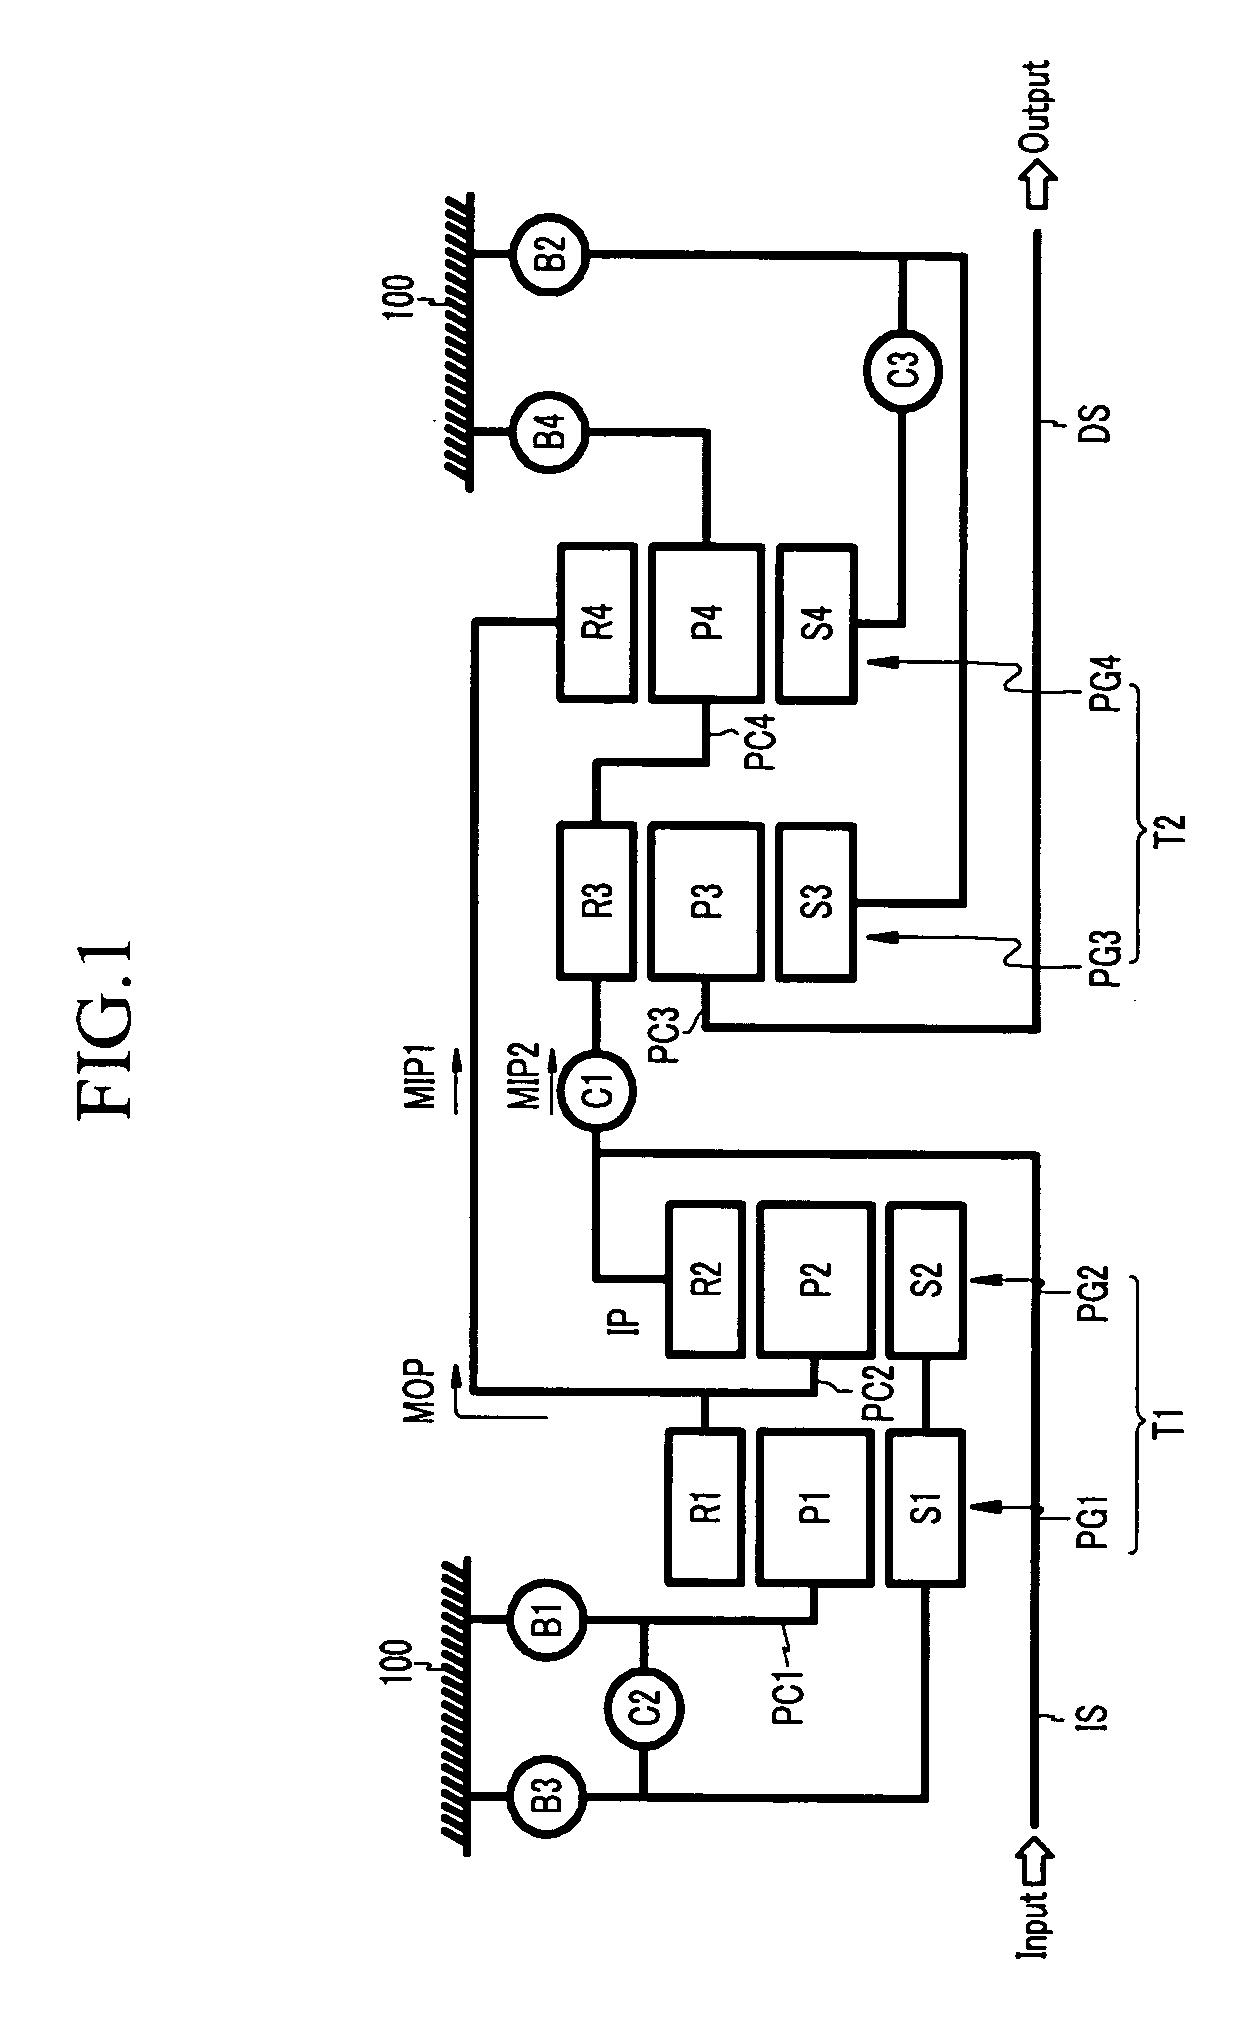 Eight-speed powertrain of automatic transmission for vehicle